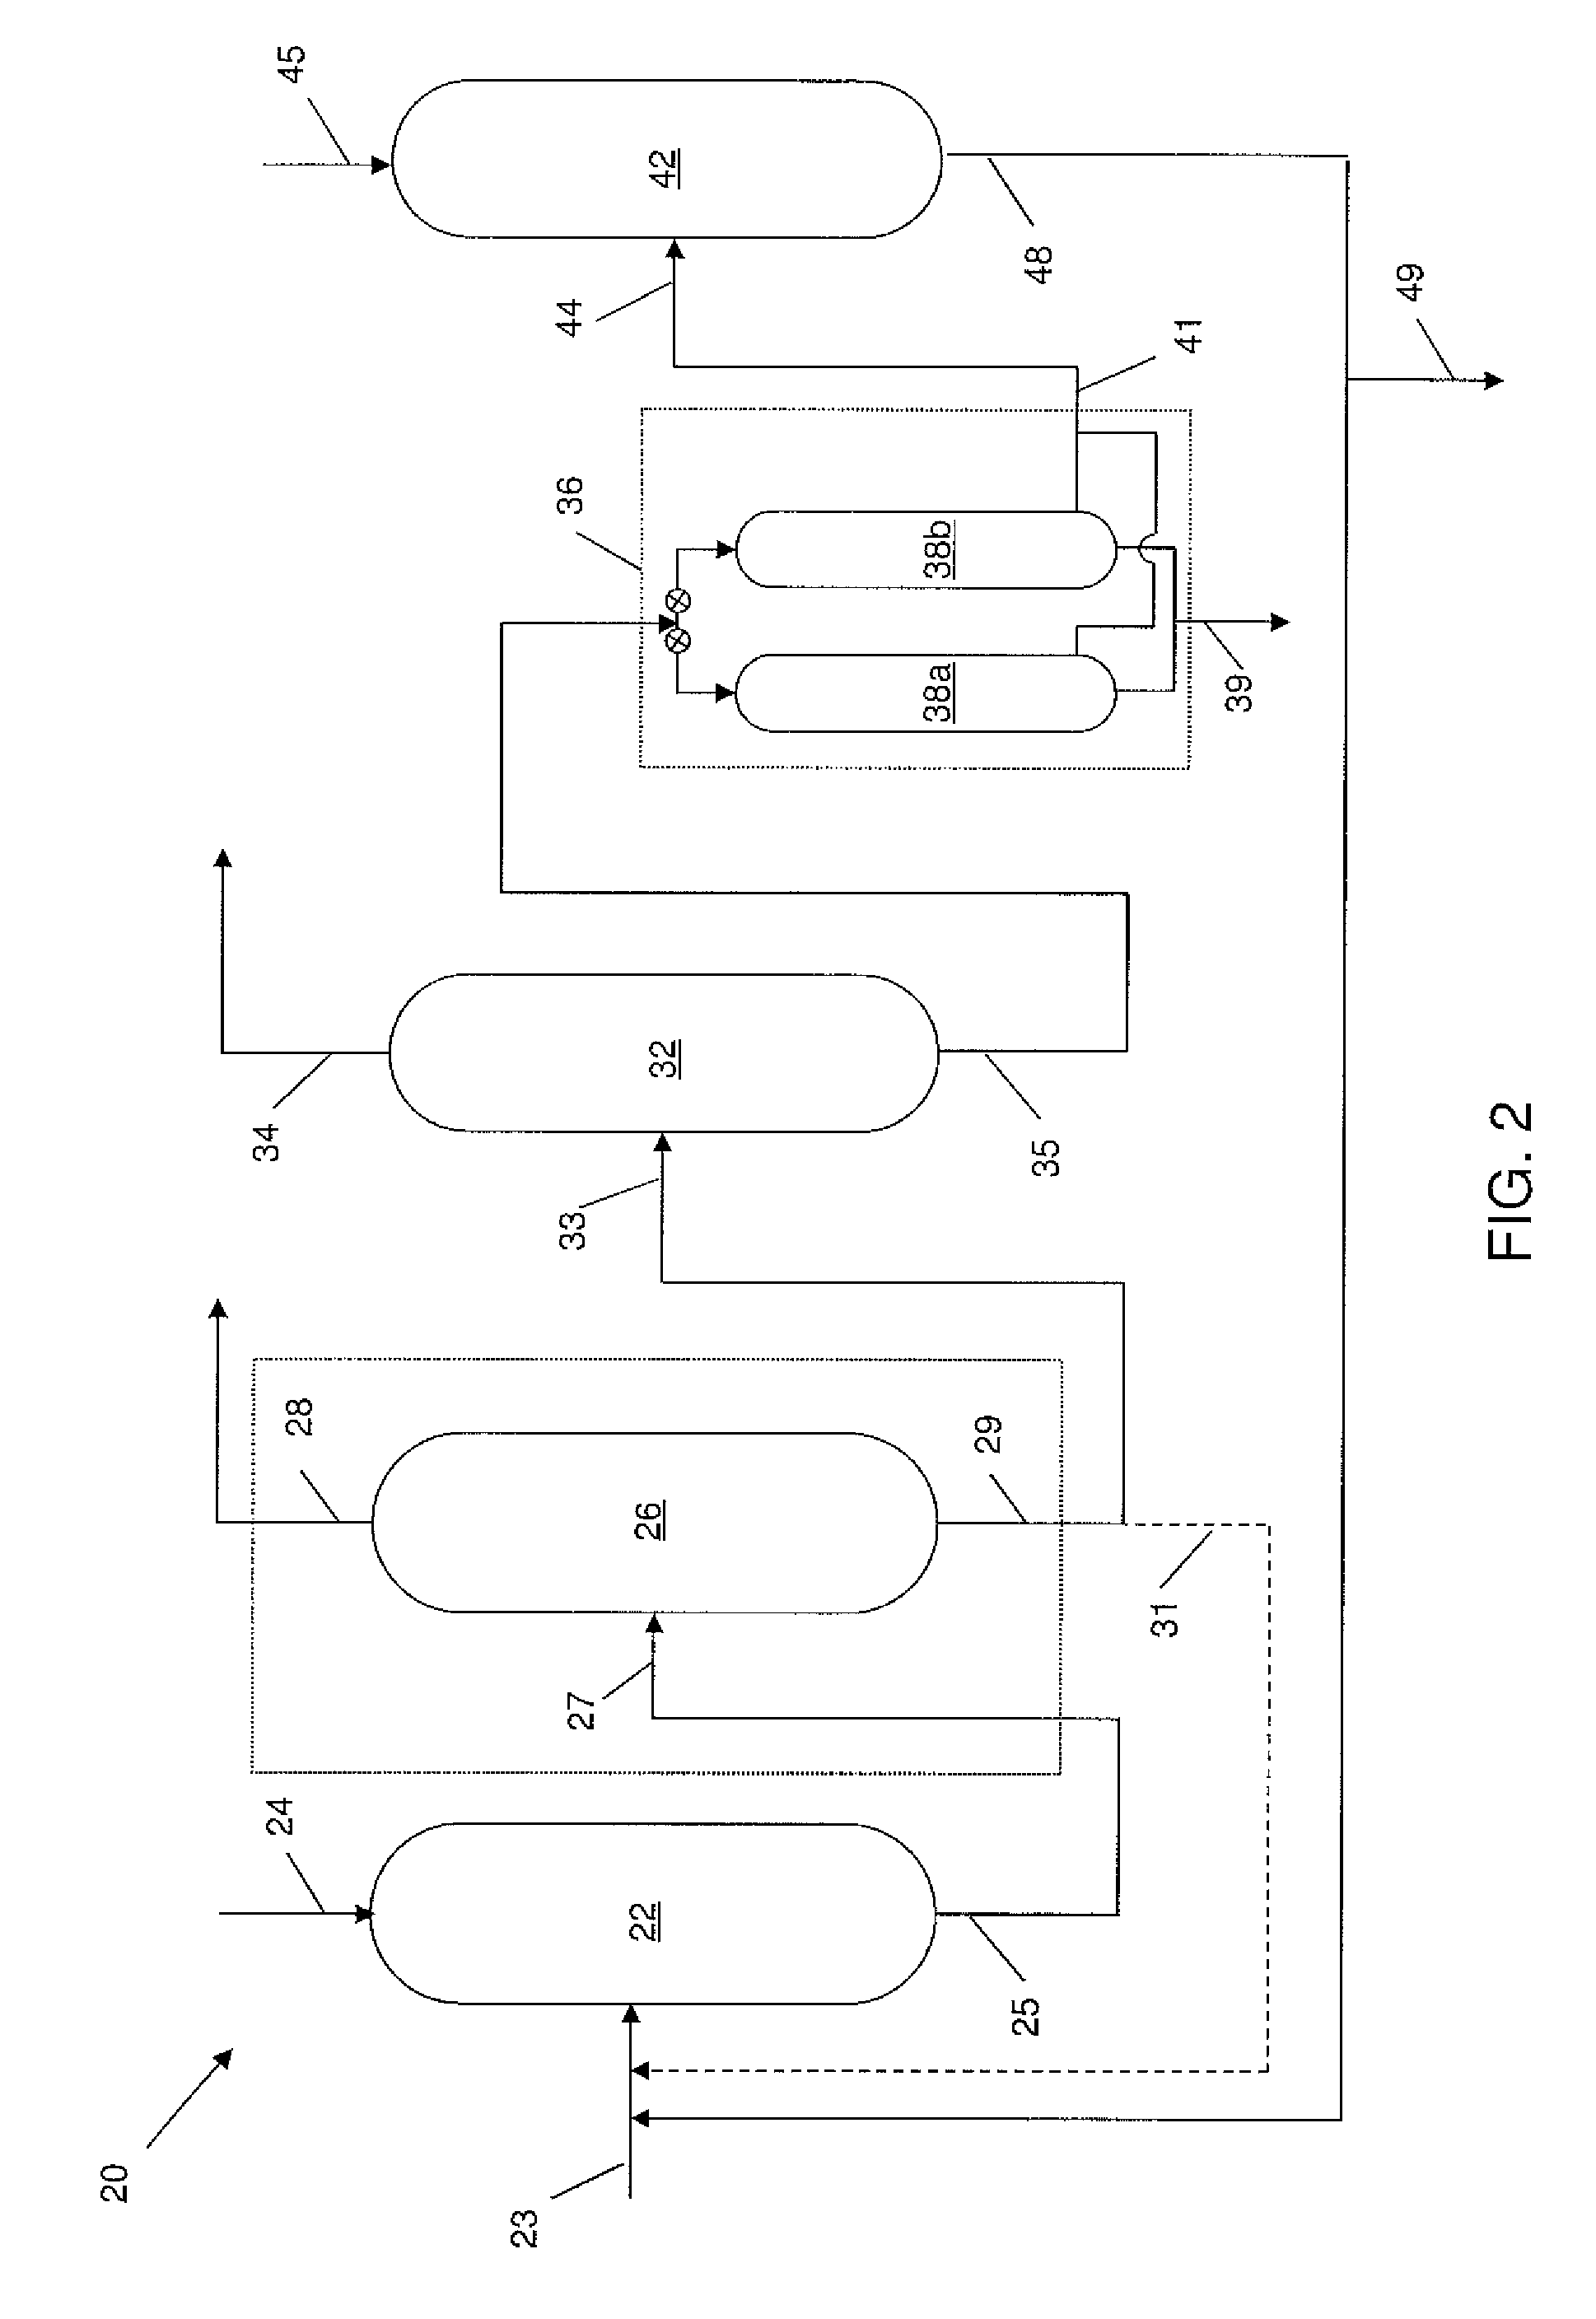 Integrated hydrotreating and isomerization process with aromatic separation